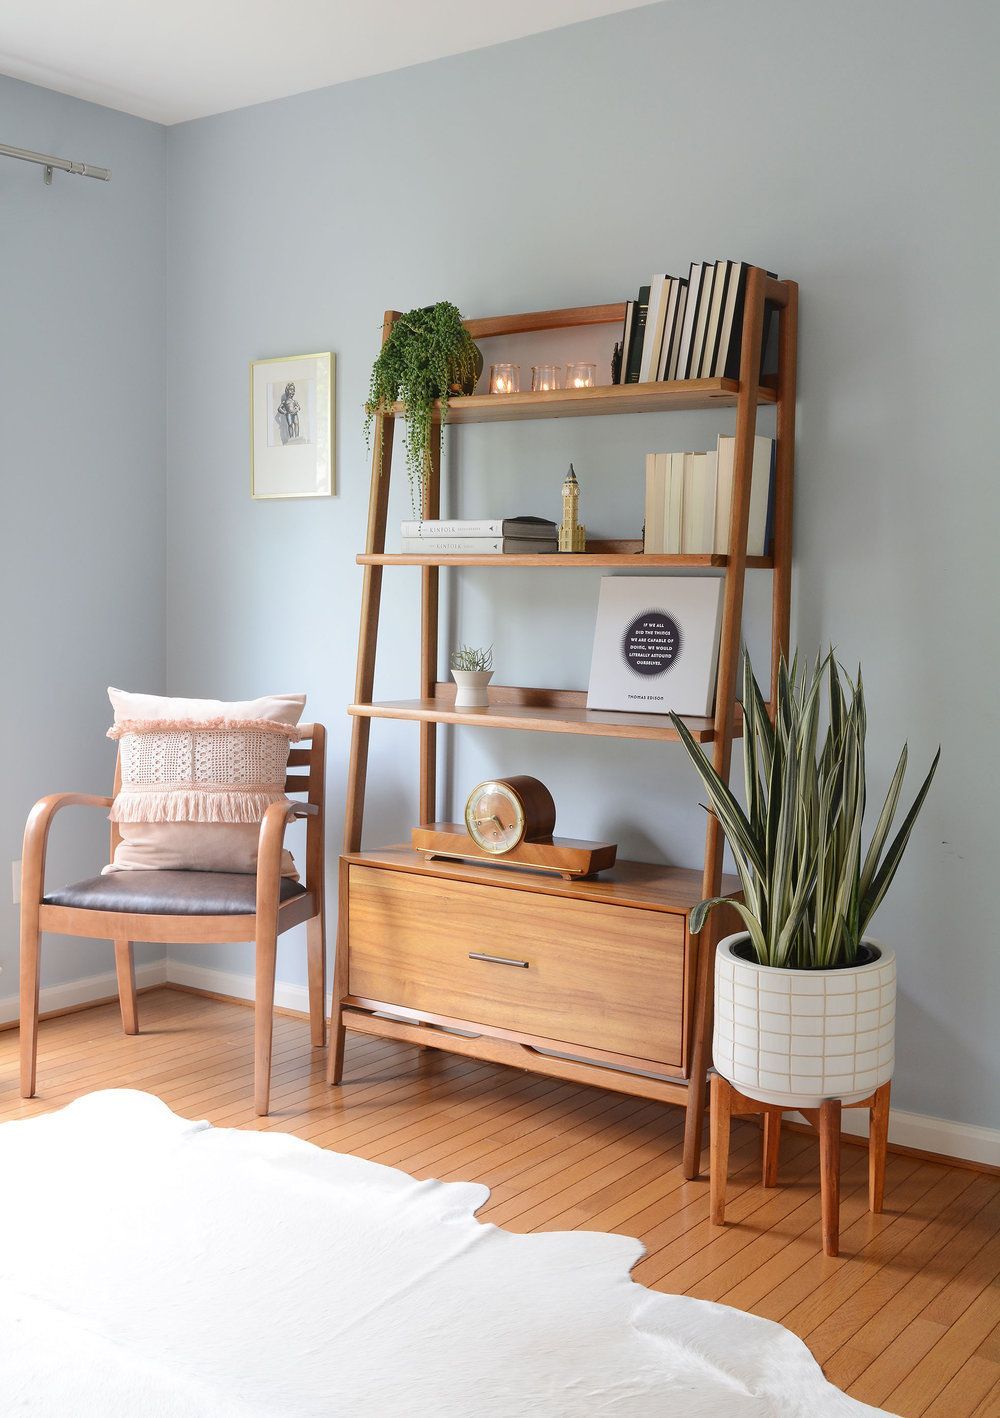 Home tour: the serene and happy home of Monika Martin from Zigzag Studio Design -   20 scandinavian style shelves
 ideas